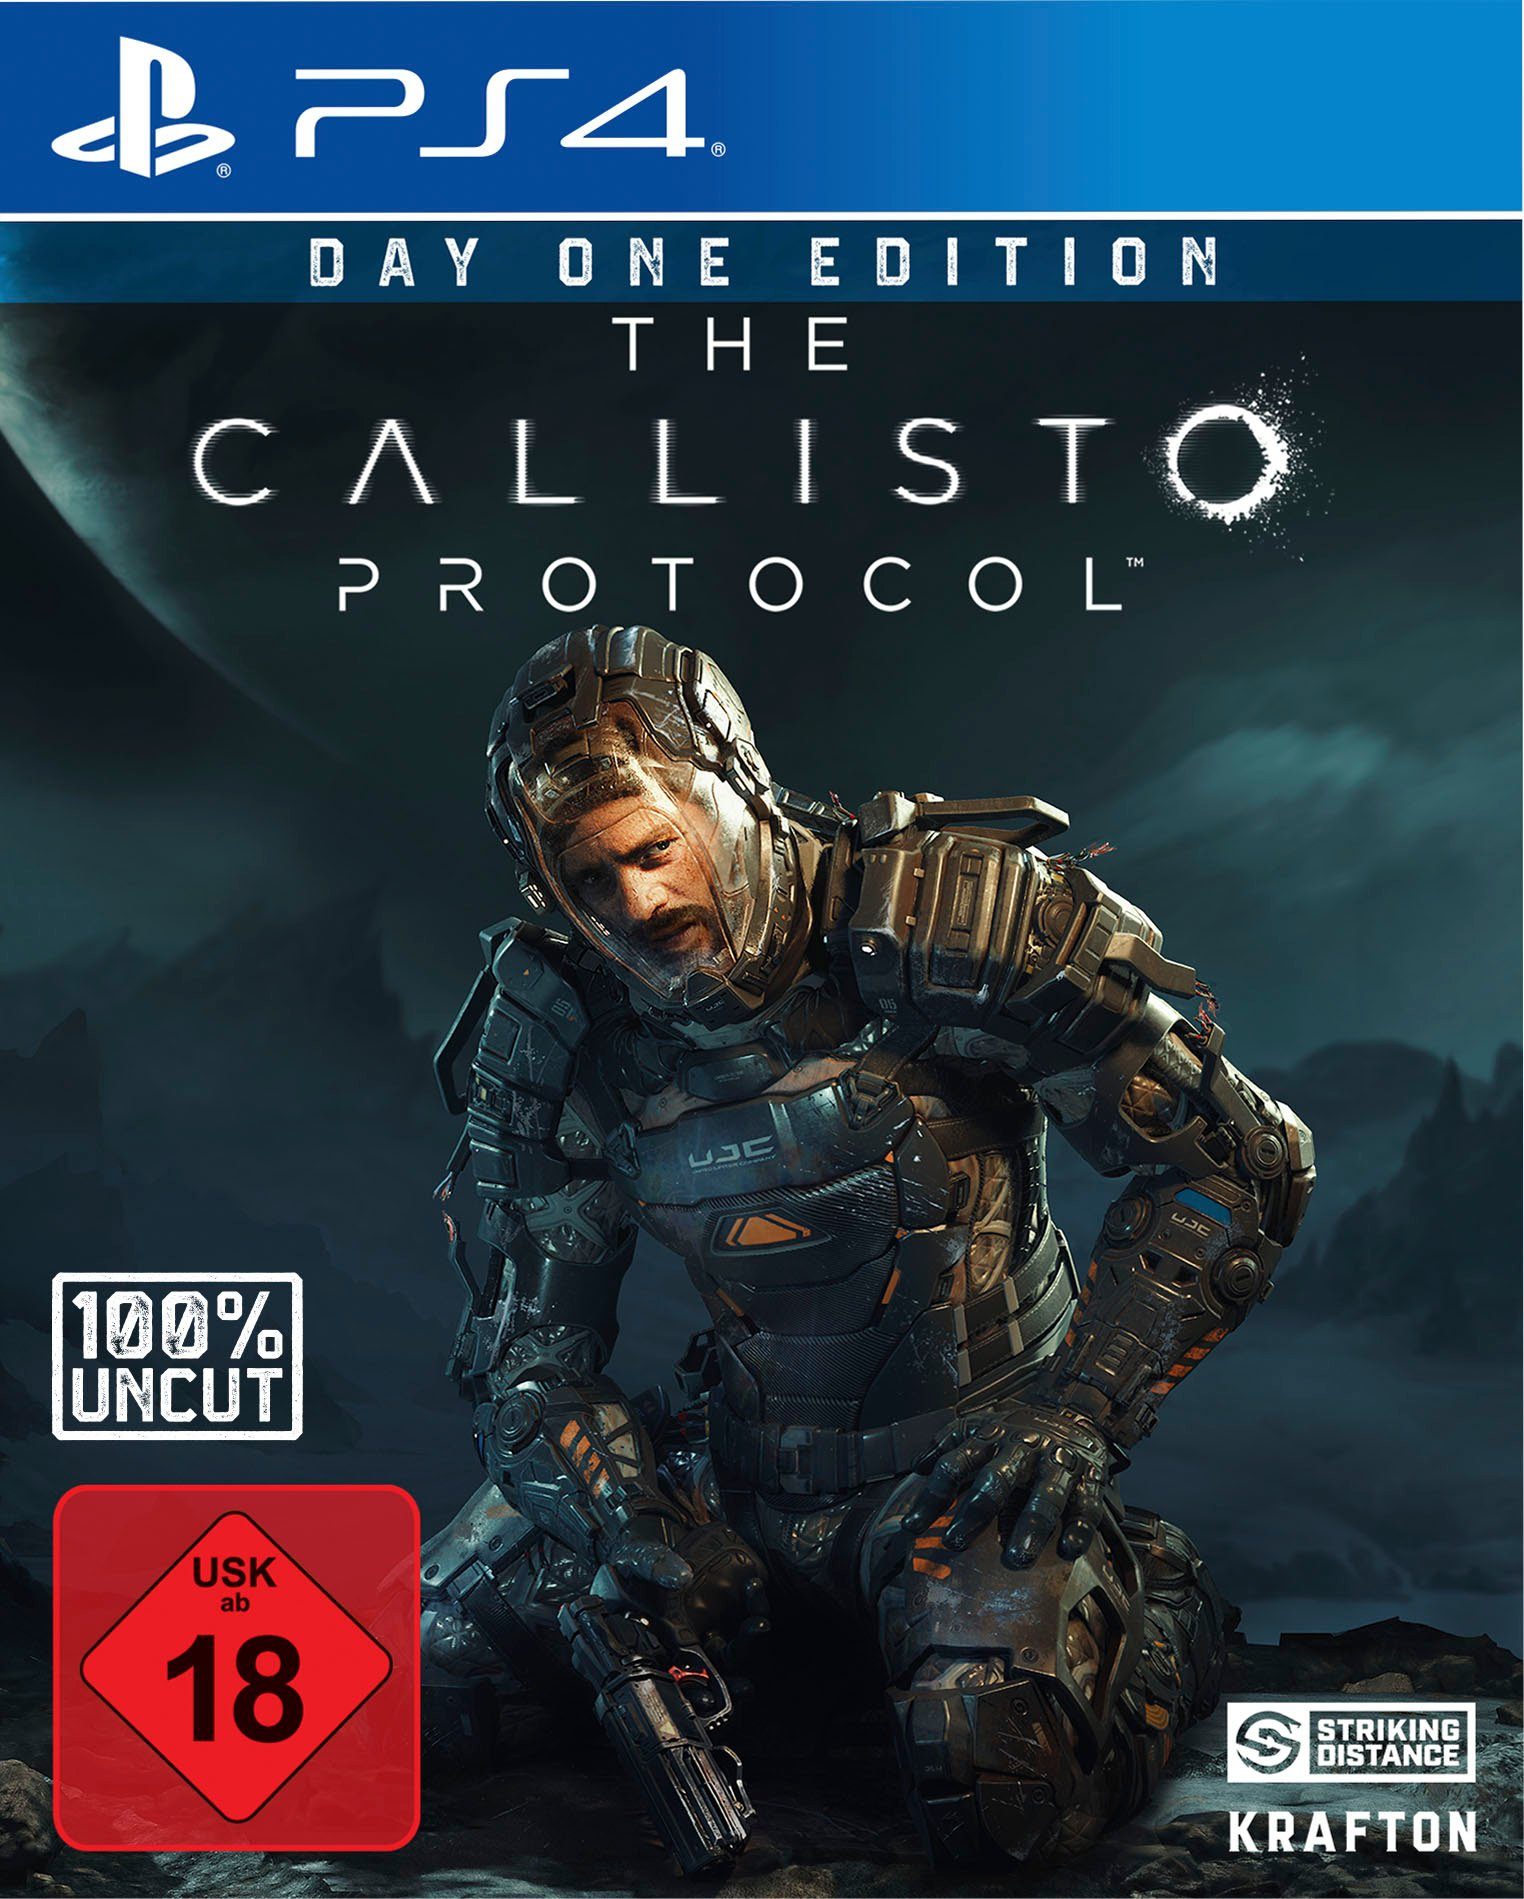 PlayStation Games One The 4 Day Skybound Protocol Callisto